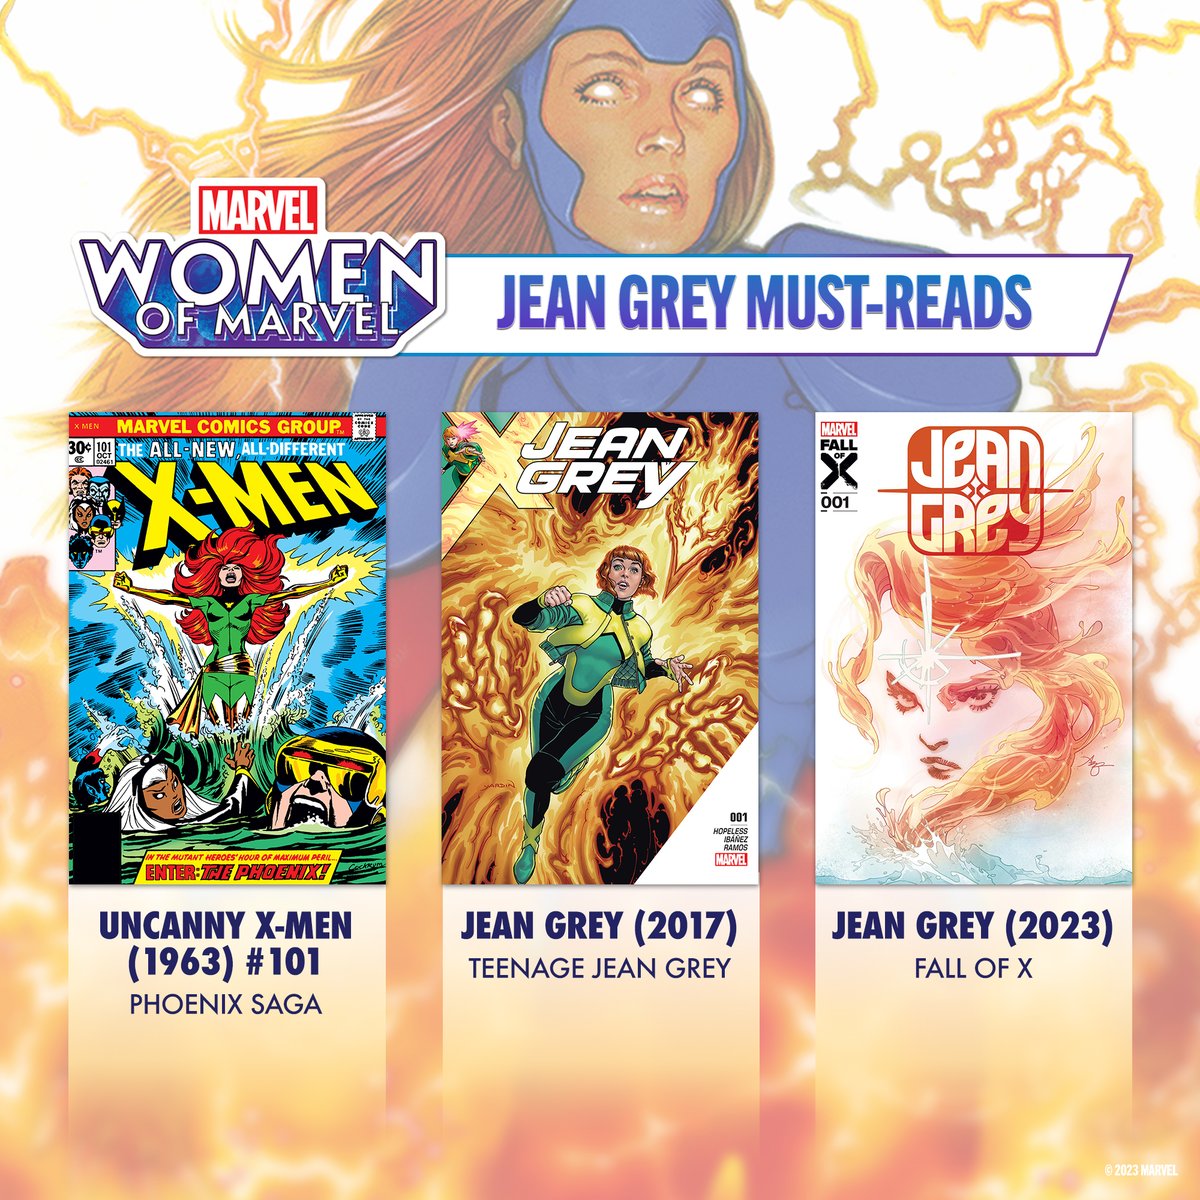 The new #WomenOfMarvel podcast season is off to a fiery start with an episode all about Jean Grey! Brush up on a few of the mutant’s must-read #MarvelComics and dive into her powers, history, and more on the podcast episode. 🎧 Listen now: marvel.com/womenofmarvel